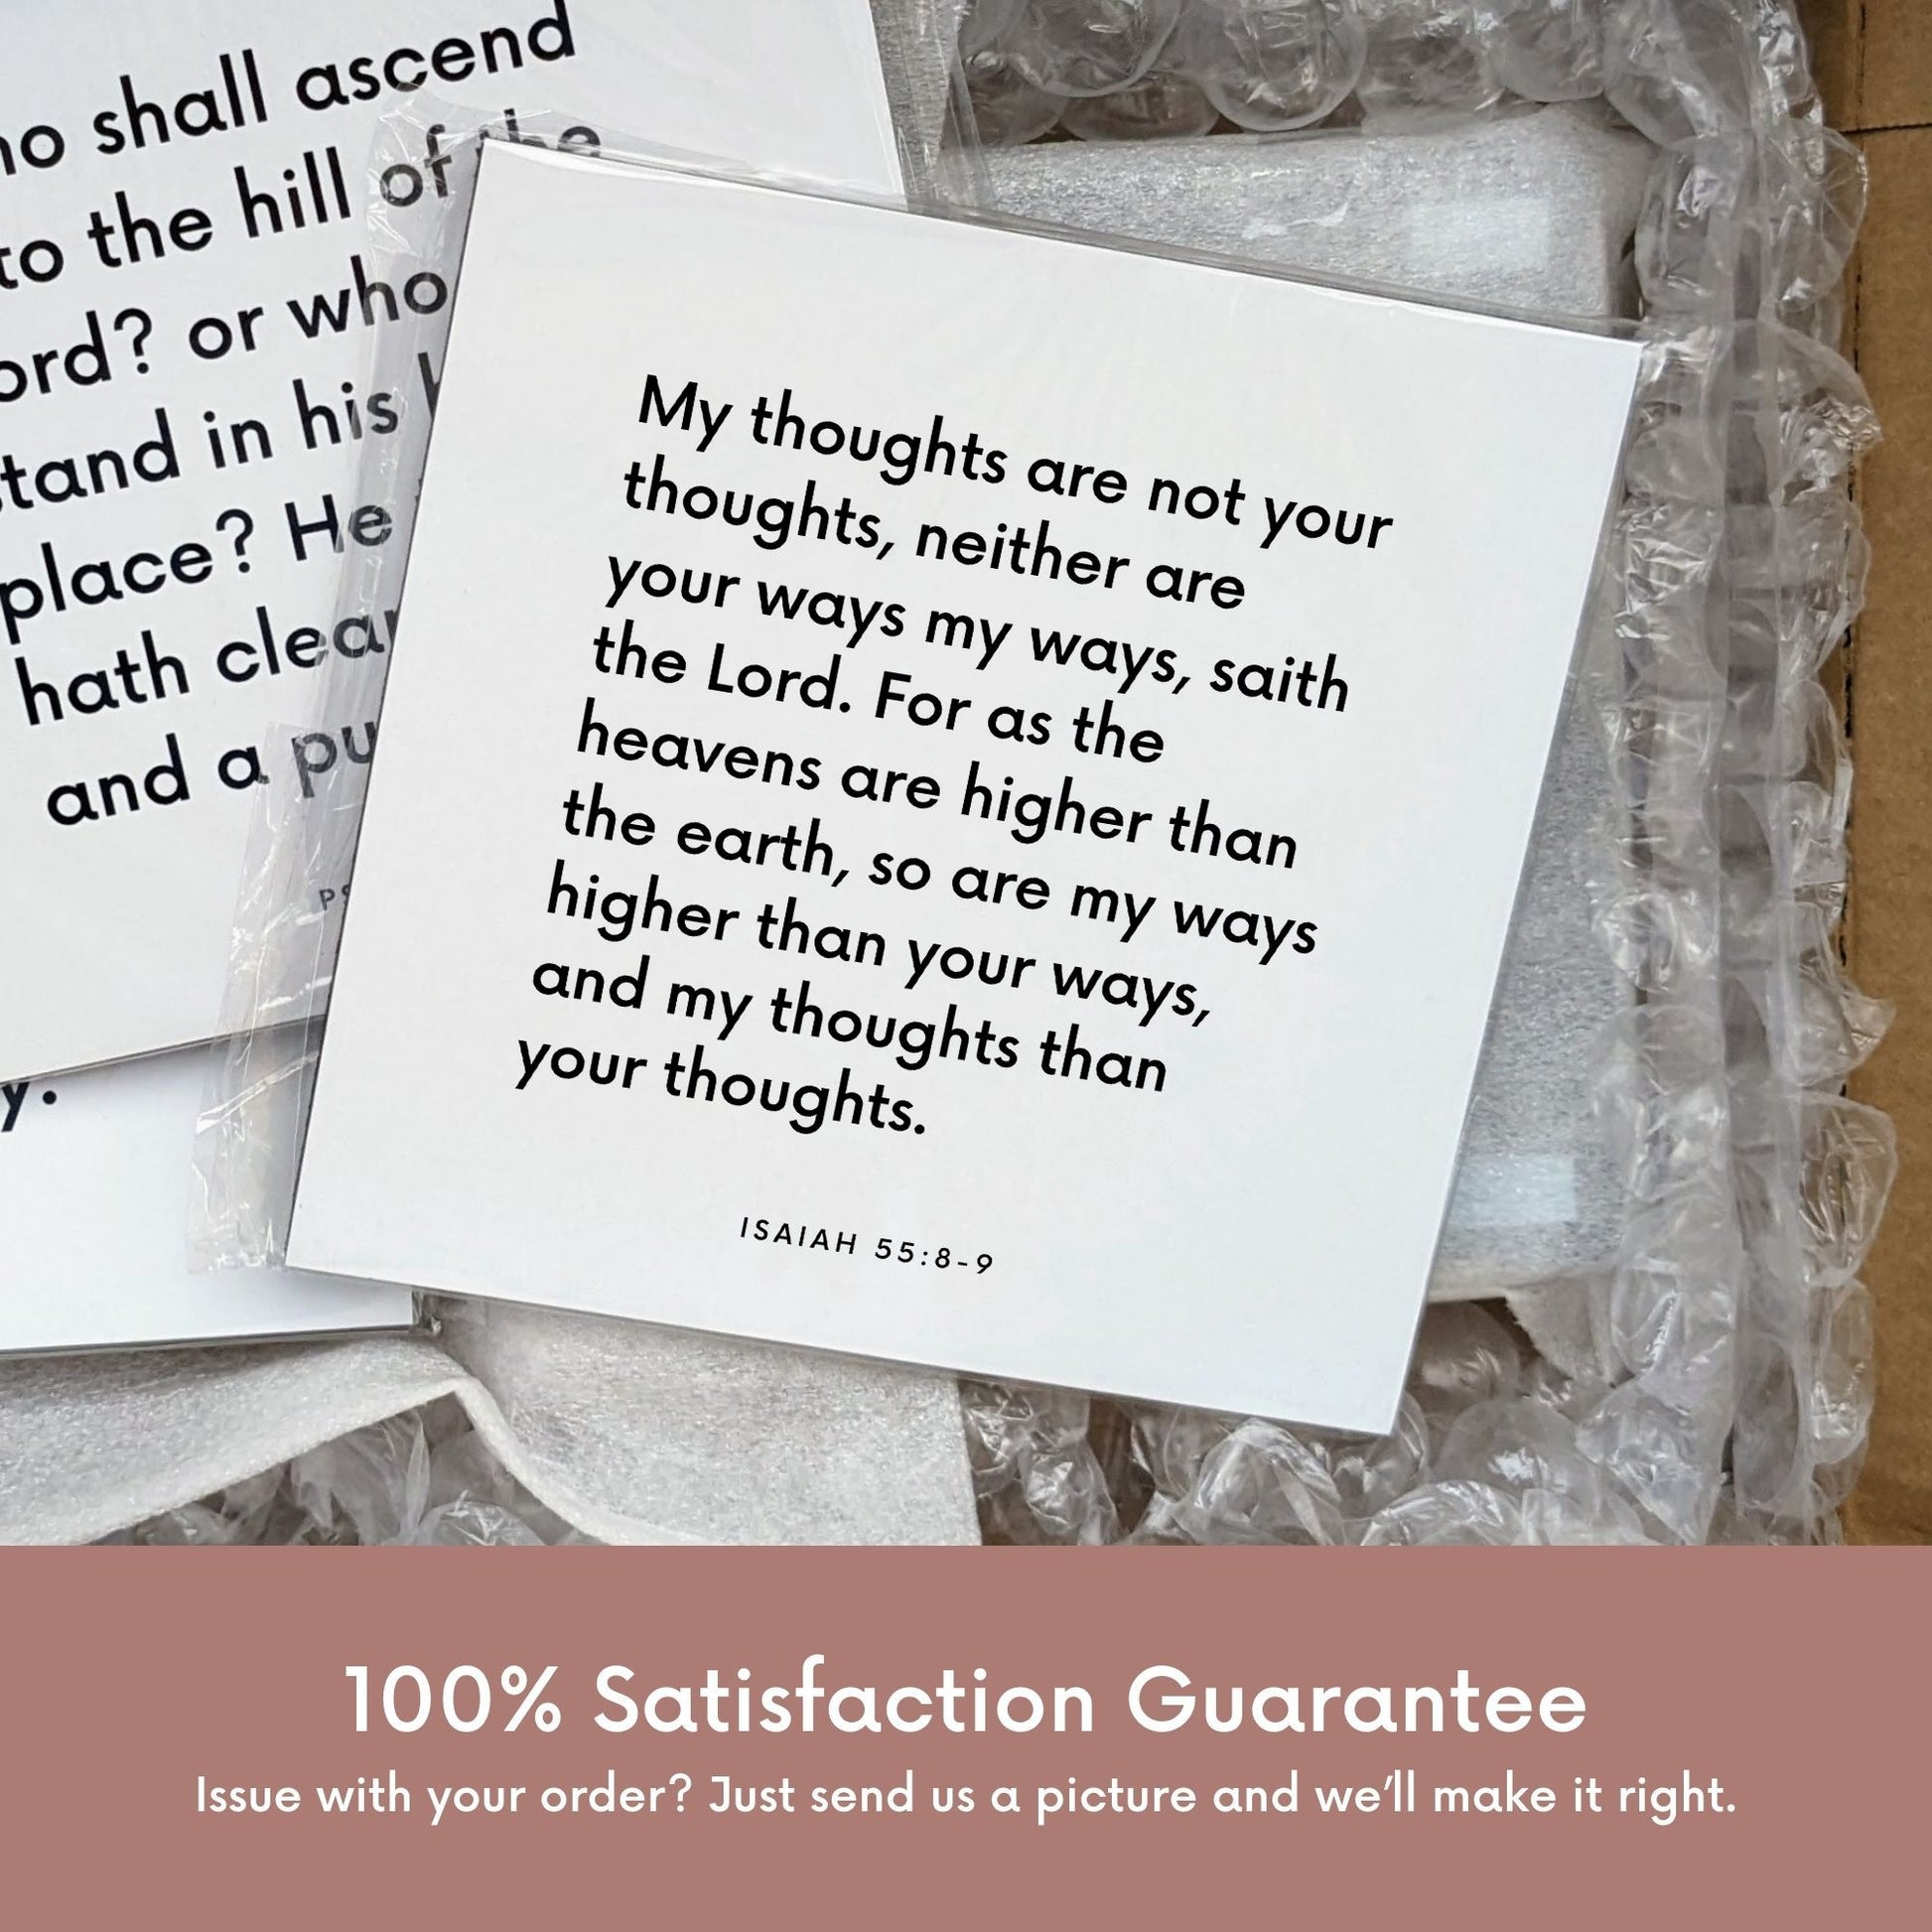 Shipping materials for scripture tile of Isaiah 55:8-9 - "My thoughts are not your thoughts, neither your ways my ways"